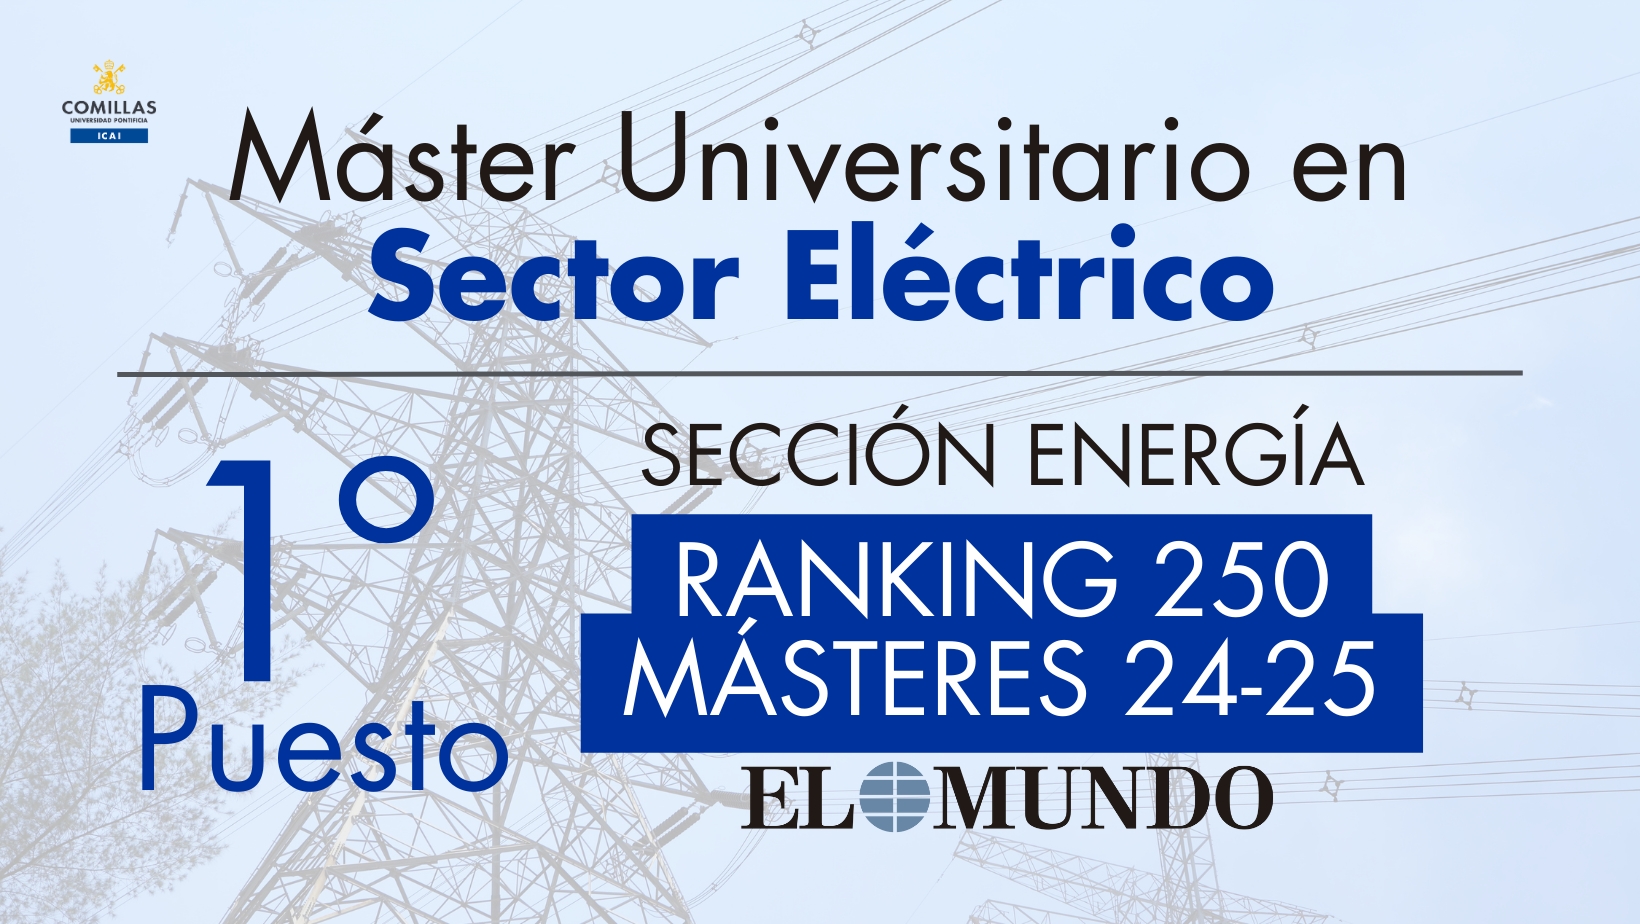 Advertisement for a masters program in the electrical sector ranked first in the 'Energy Section' of the 'El Mundo' 250 Masters ranking for 2024-25, featuring electrical pylons in the background.